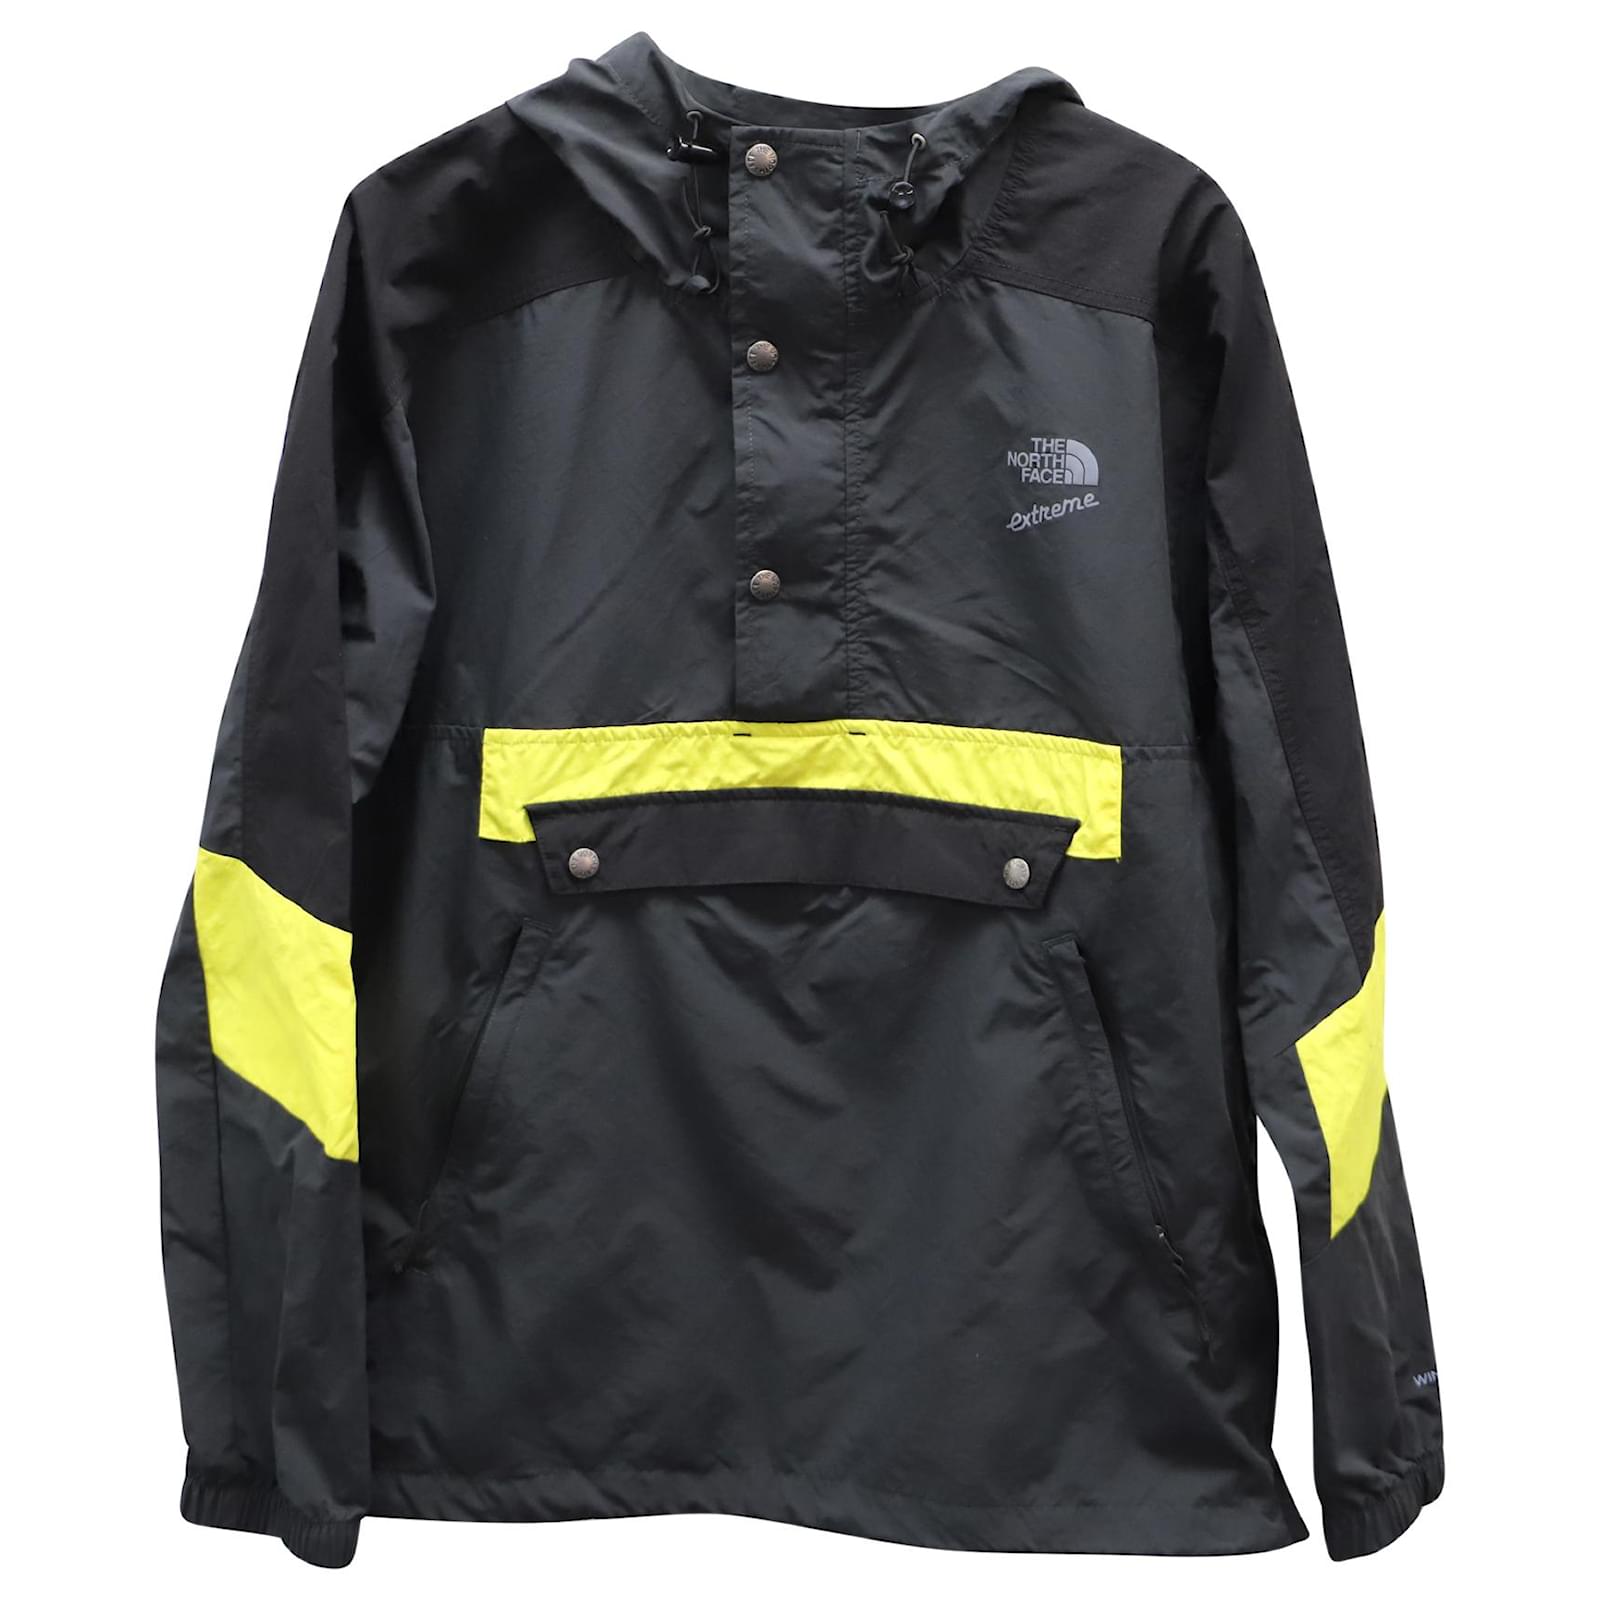 The North Face '90 Extreme Wind Anorak Jacket in Multicolor Nylon